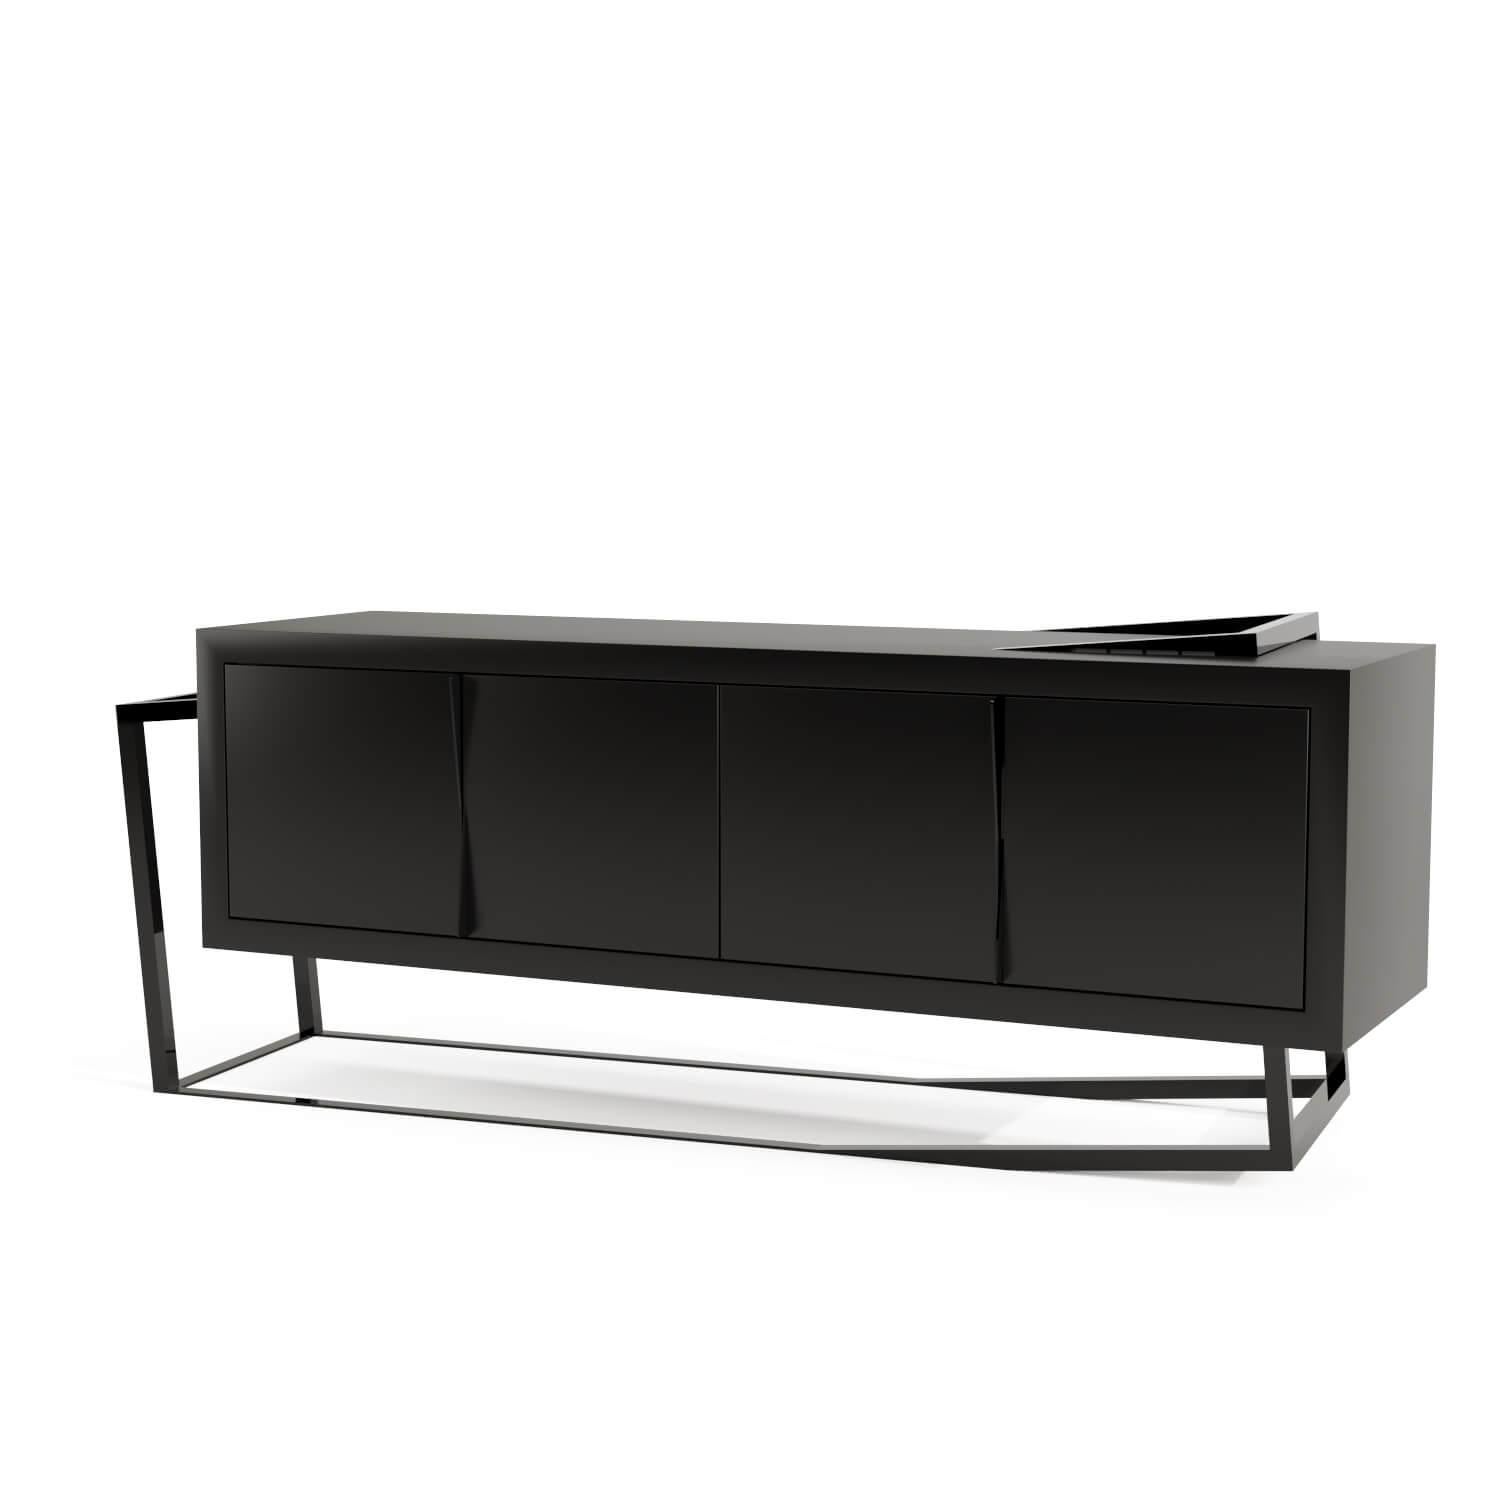 The credenza sideboard excentric 1.0 is made in black oak wood and high-gloss black lacquered steel and can be placed in a dining or office room. Its contemporary and edgy design challenges the perceptions of a usual sideboard. This piece would make